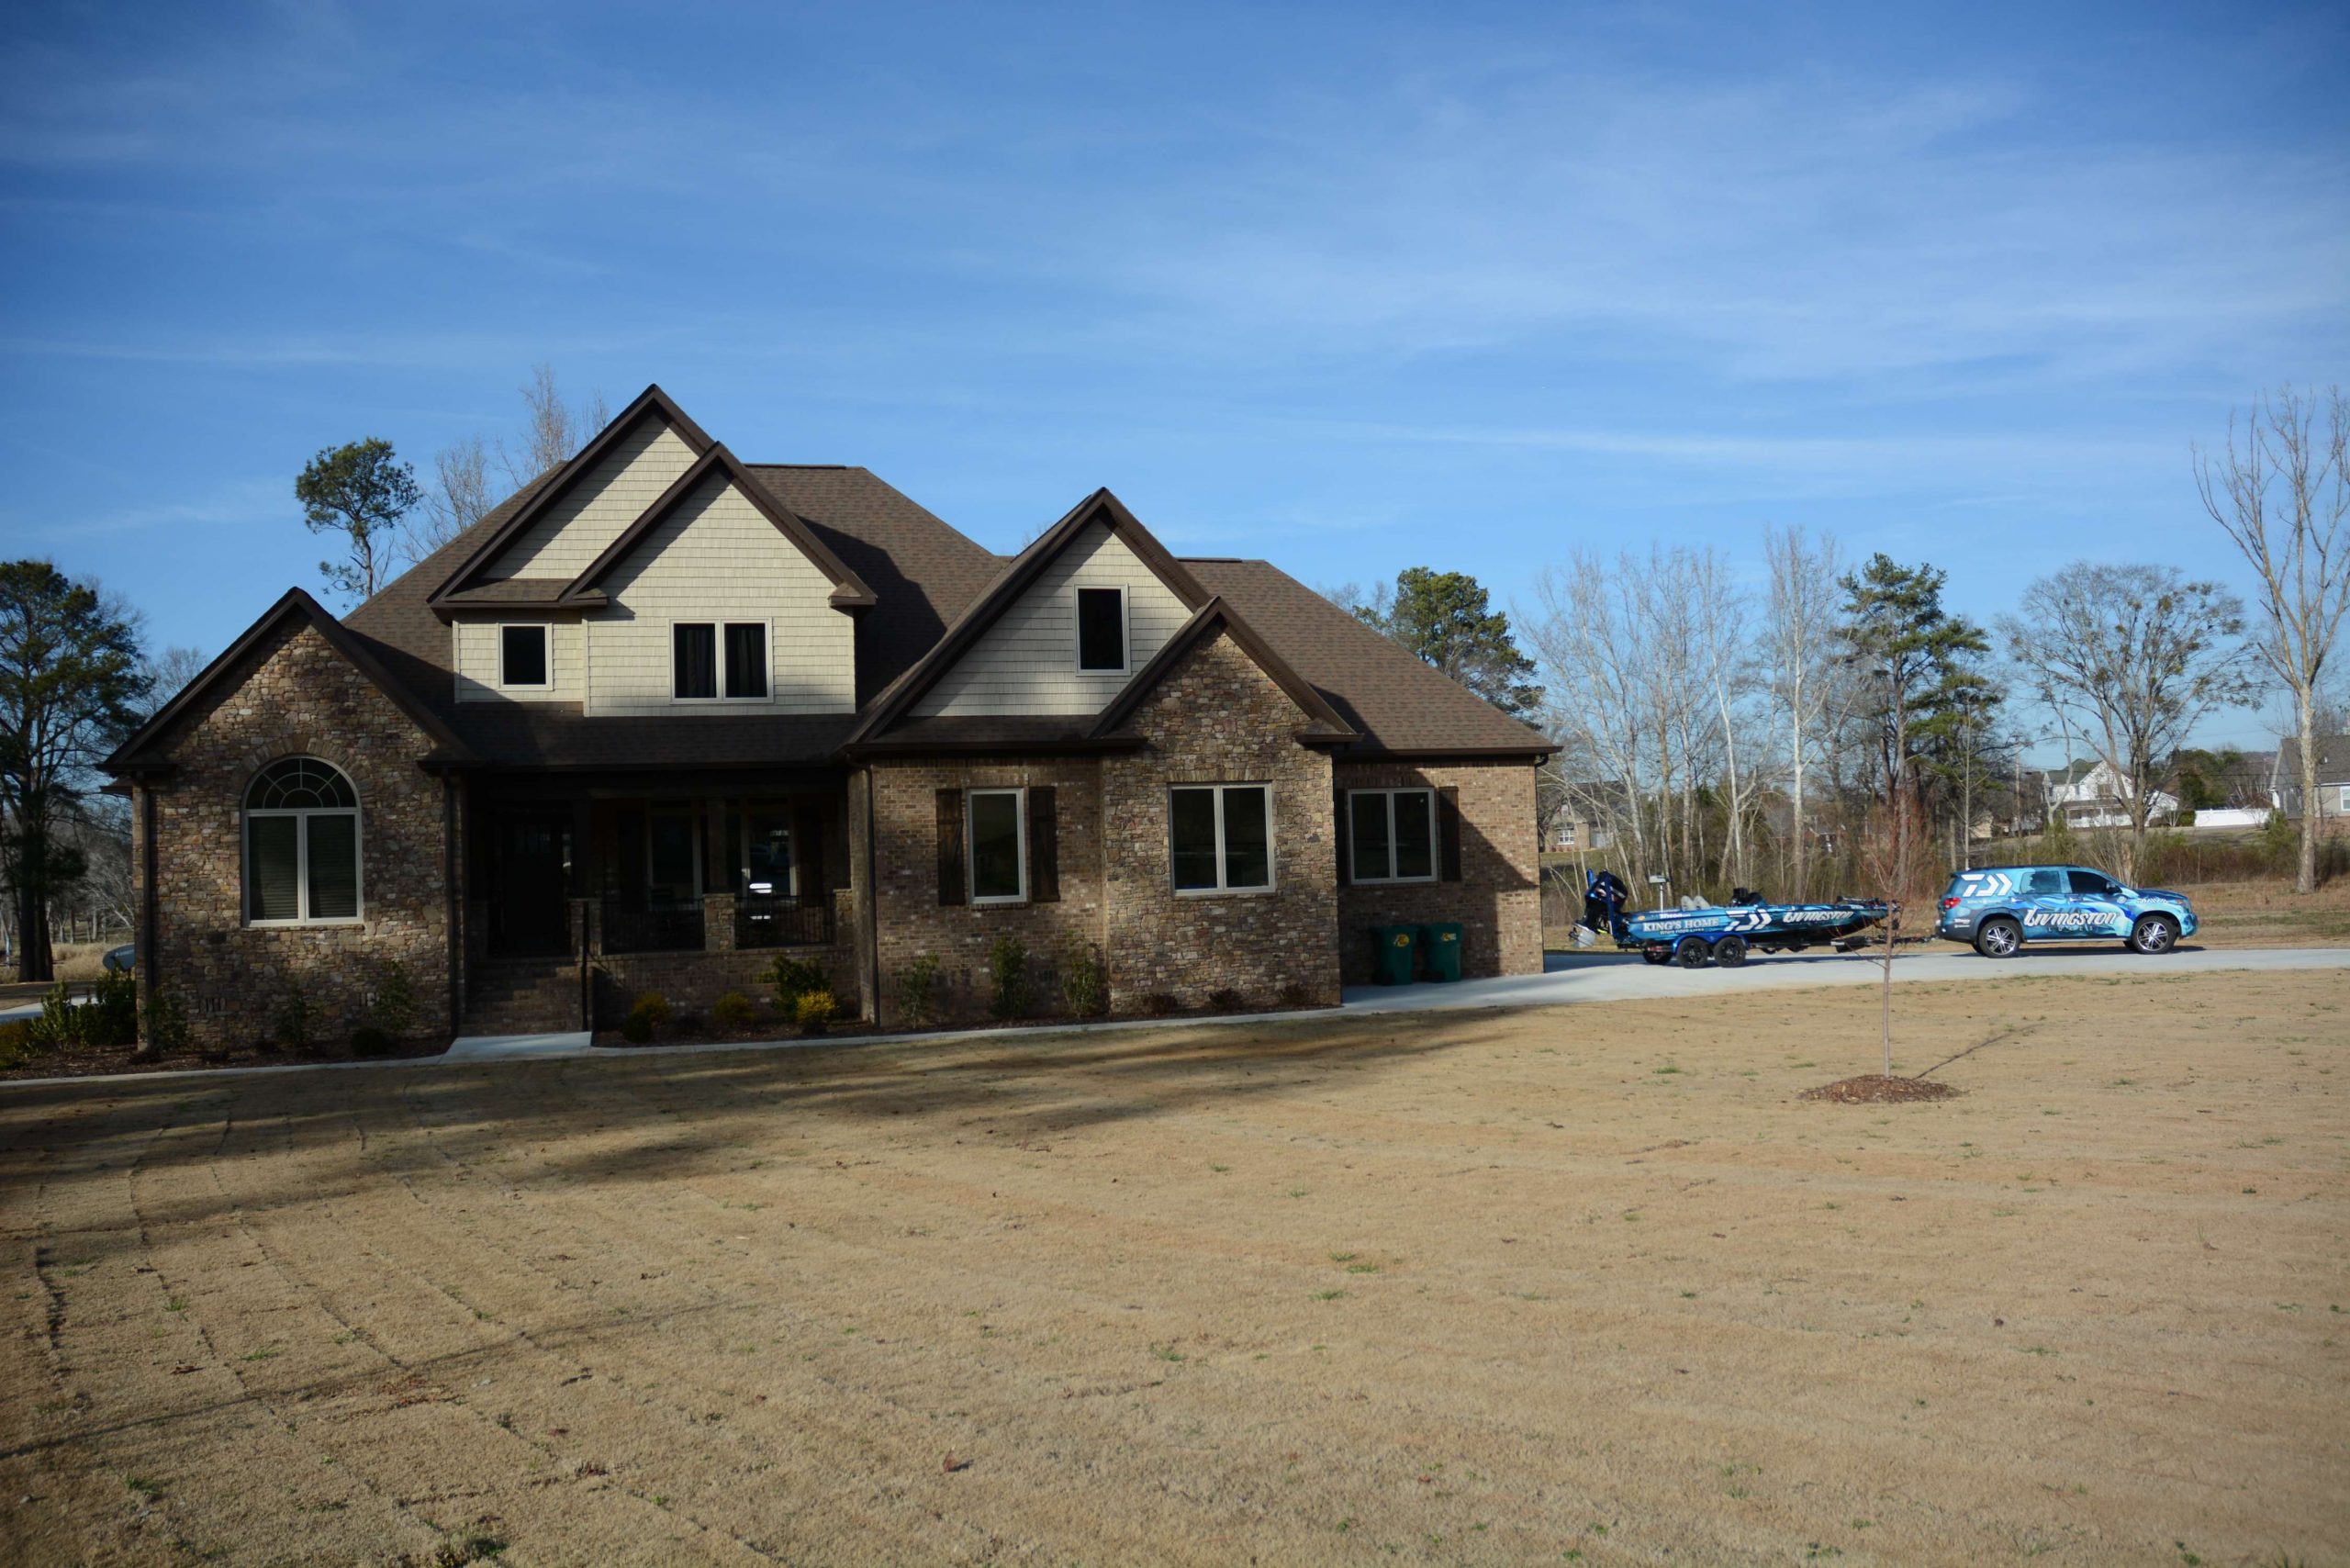 Behind this house is a creek on Lake Guntersville, where the homeowner made history in 2014.